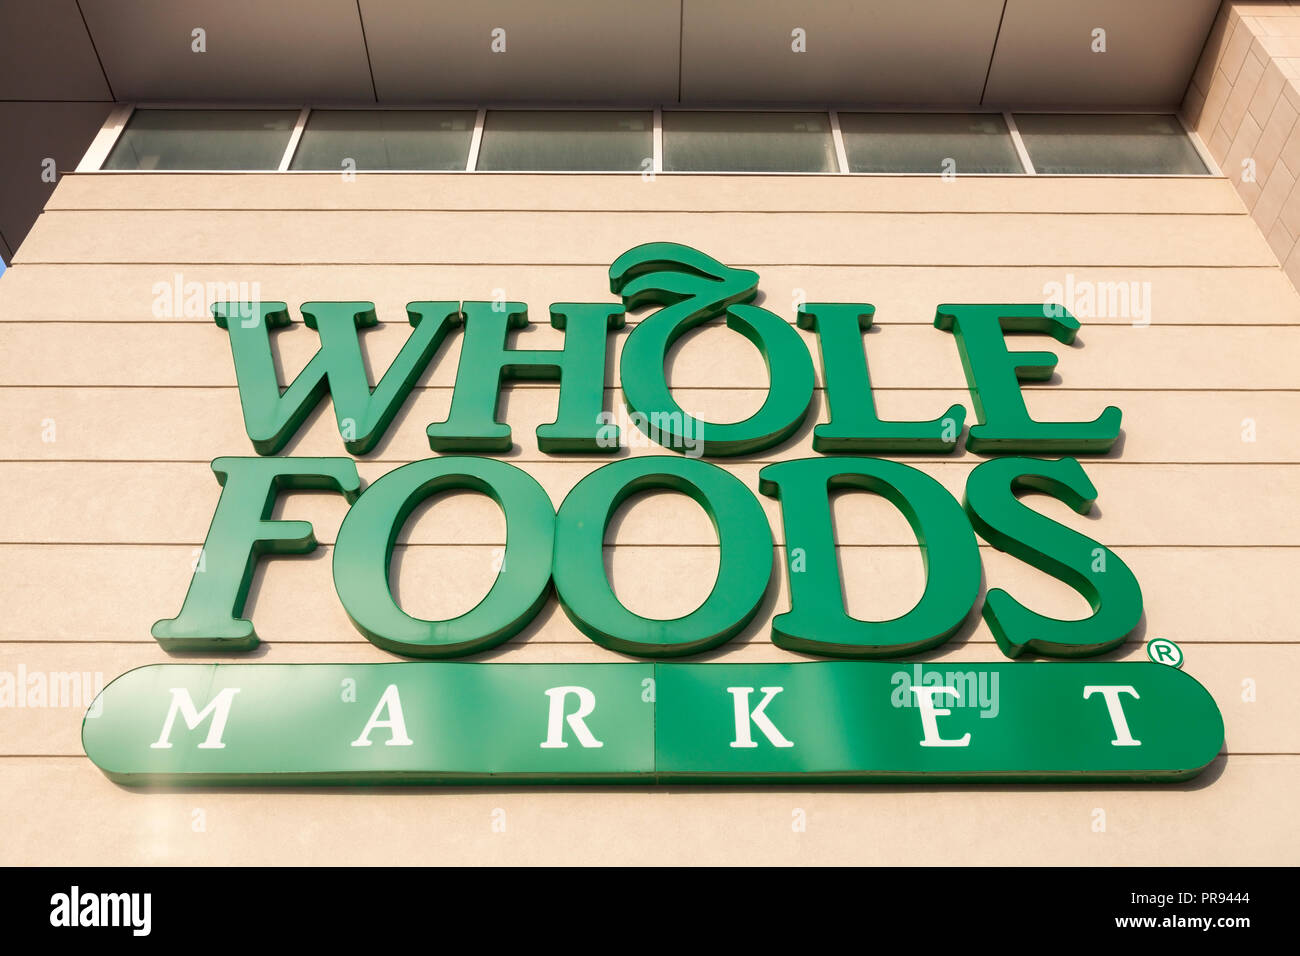 Whole Foods Market logo or sign in Markham, Ontario, Canada. Stock Photo